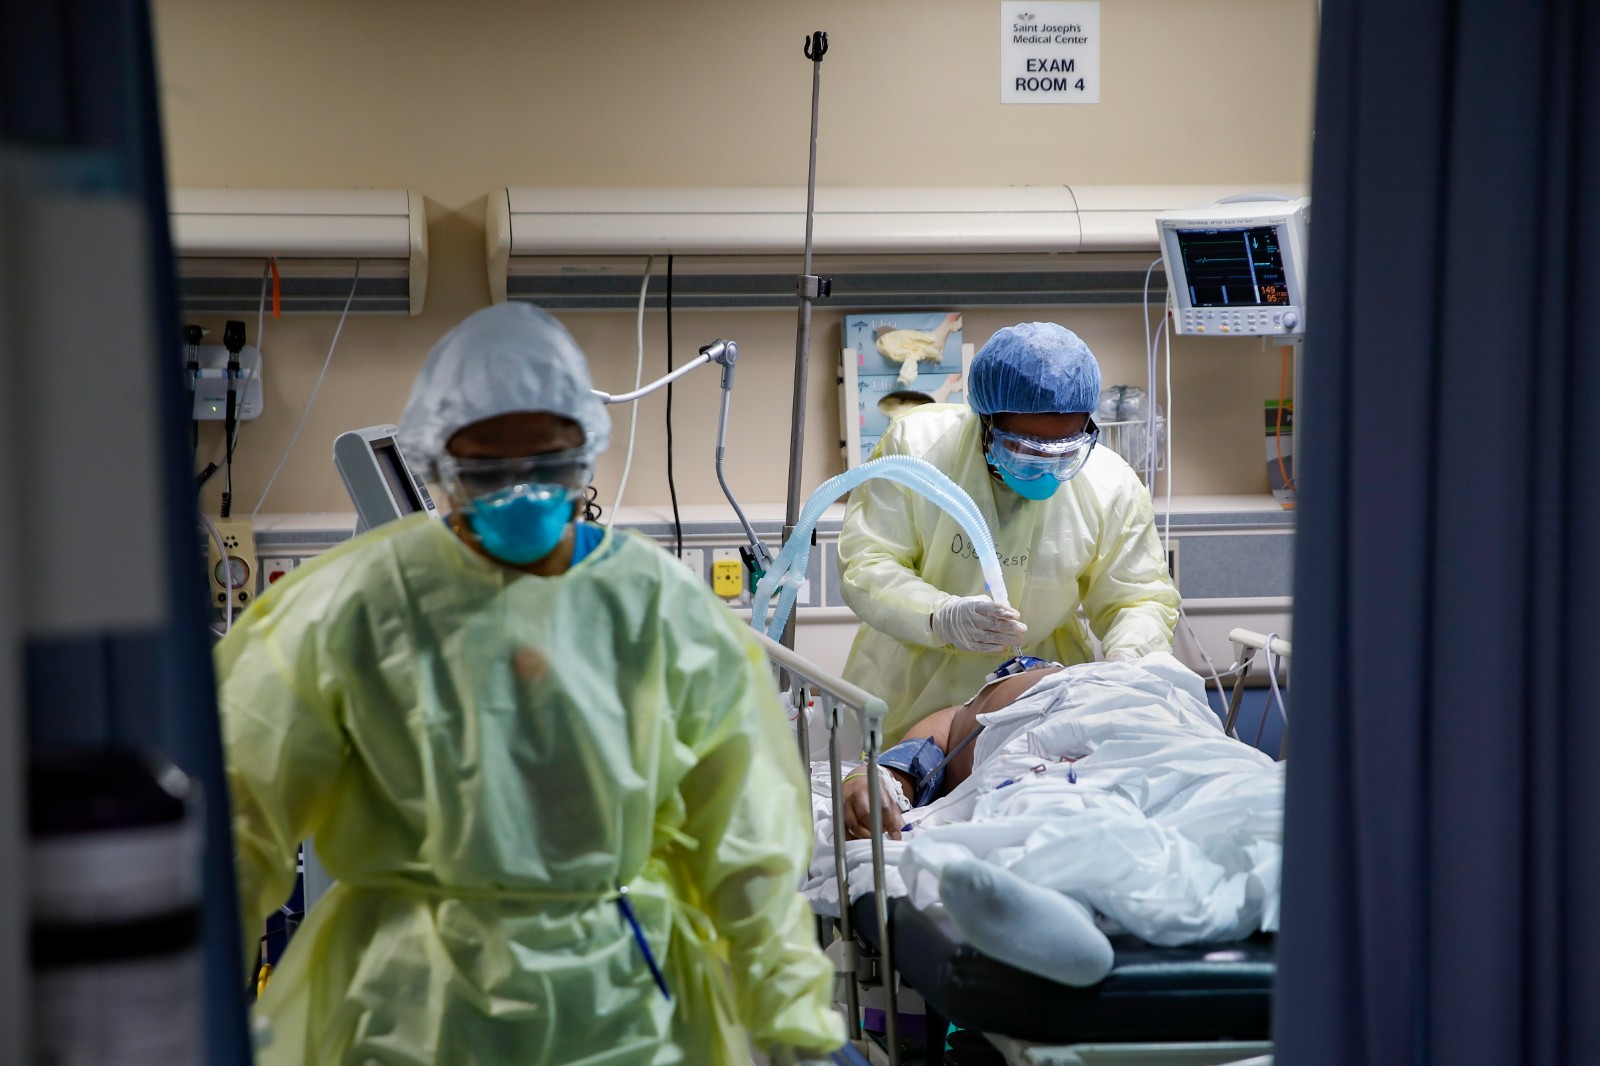 CORRECTS TO RESPIRATORY SPECIALIST FROM A NURSE - A respiratory specialist operates a ventilator for a patient with COVID-19 who went into cardiac arrest and was revived by staff, Monday, April 20, 2020, at St. Joseph's Hospital in Yonkers, N.Y. (AP Photo/John Minchillo)